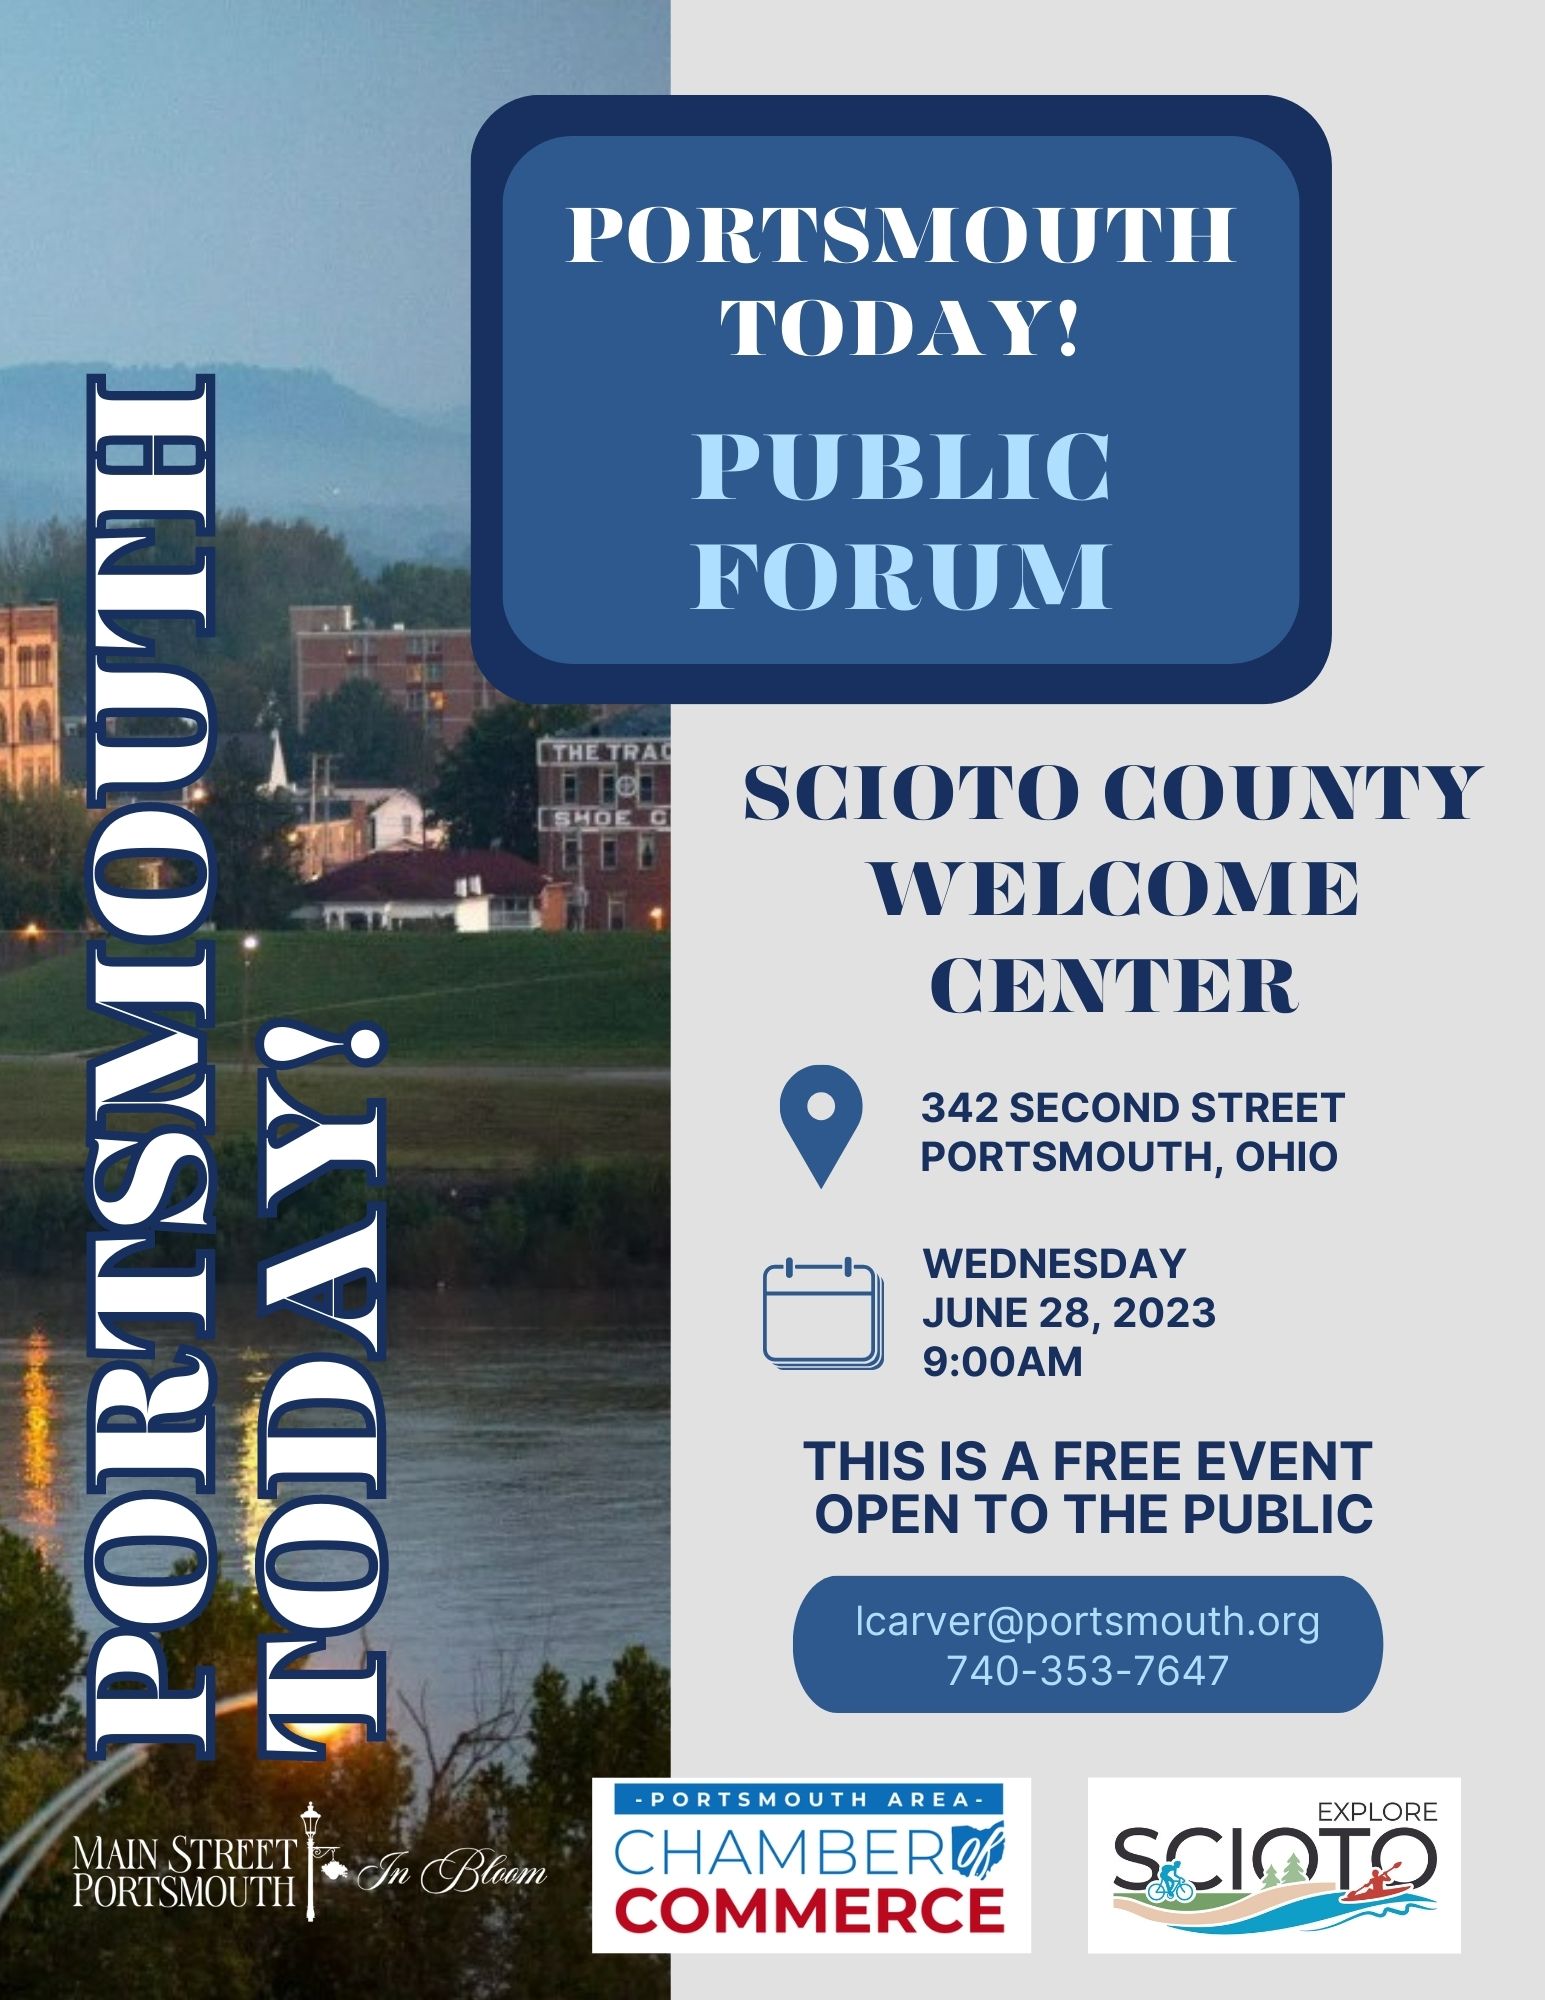 A flyer for the Portsmouth Today public forum. The information detailed on the flyer is in the event listing.